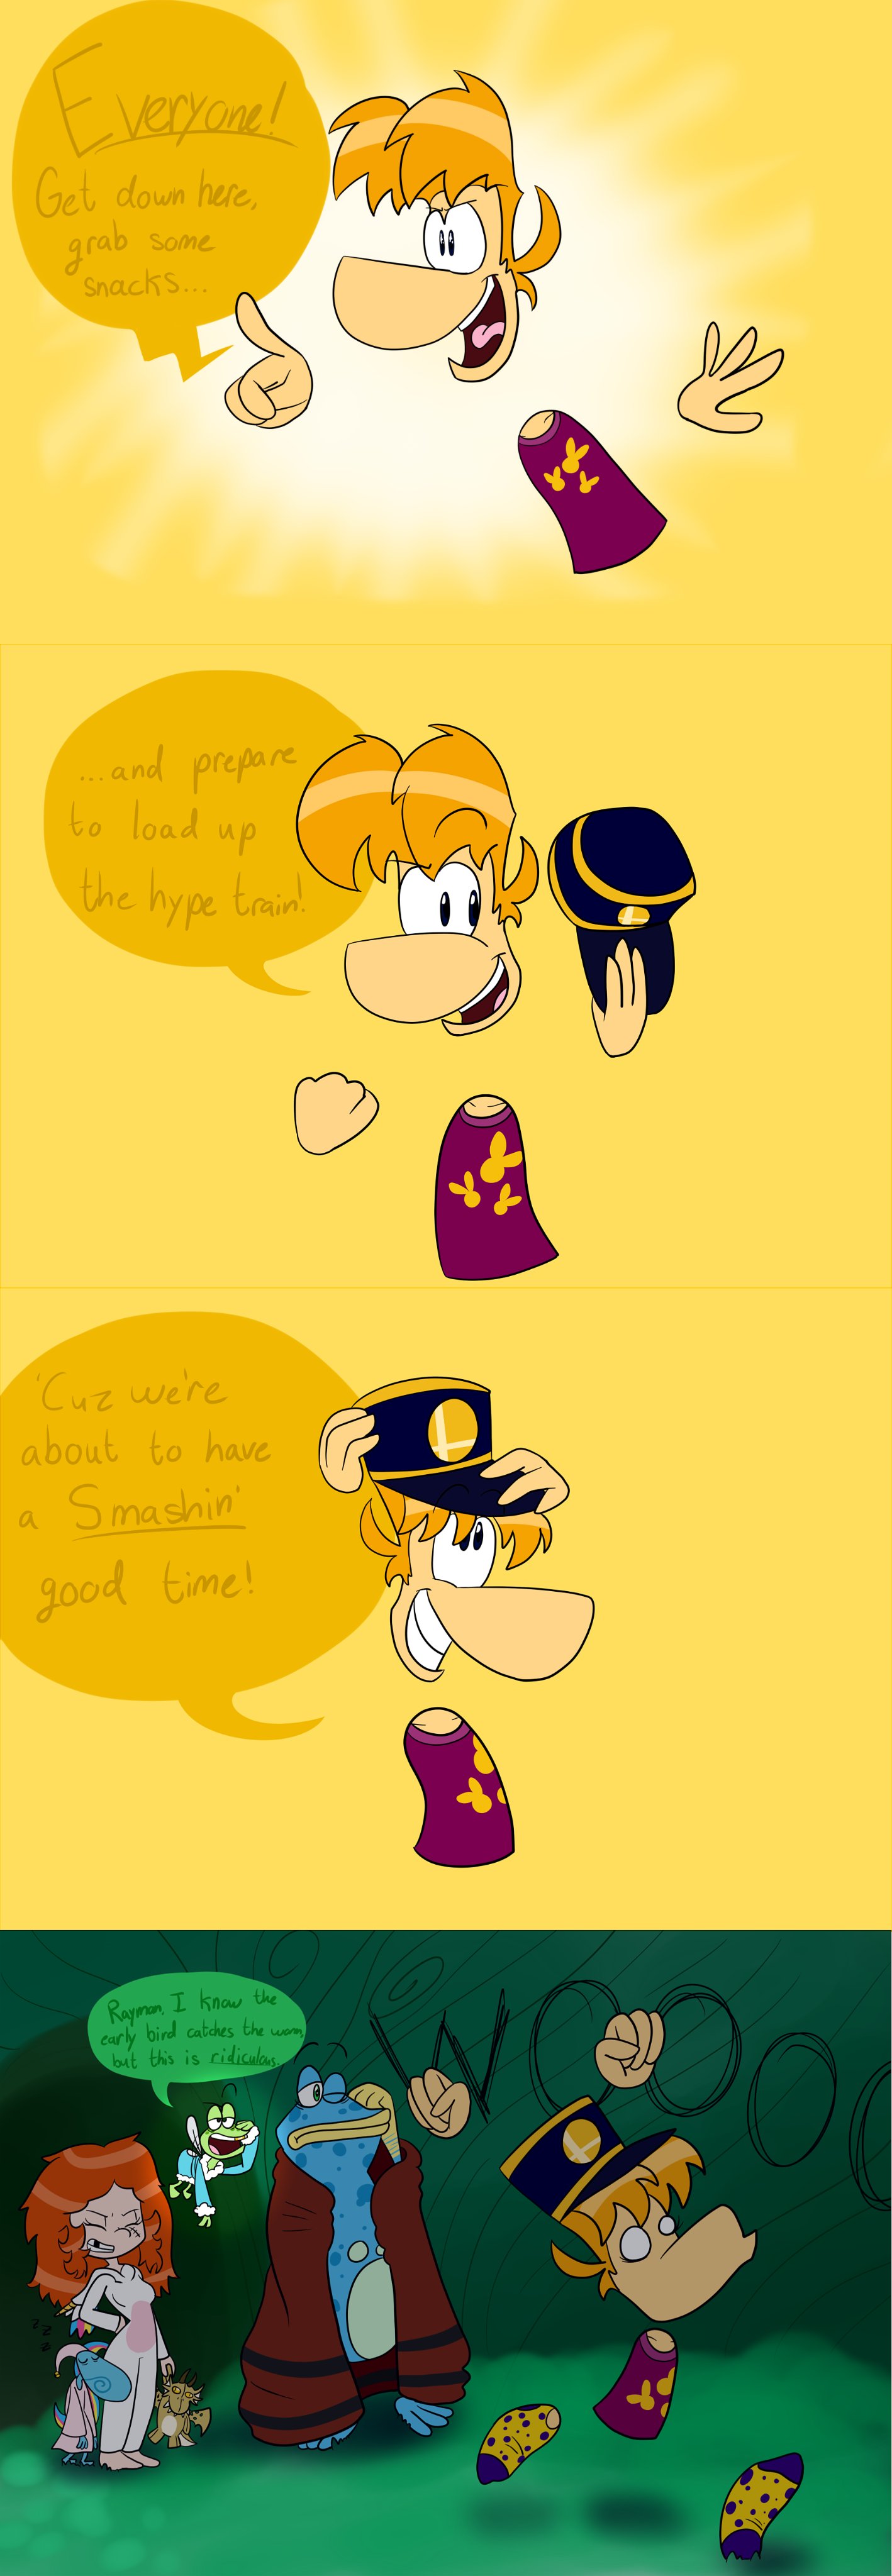 Geeky Goo Team Steam Geekygoofights On Twitter I Renewed This Rayman Comic I Made In 2018 Because I Thought There D Be A New Reveal For Supersmashbrosultimate Fighterspass2 Lo And Behold There